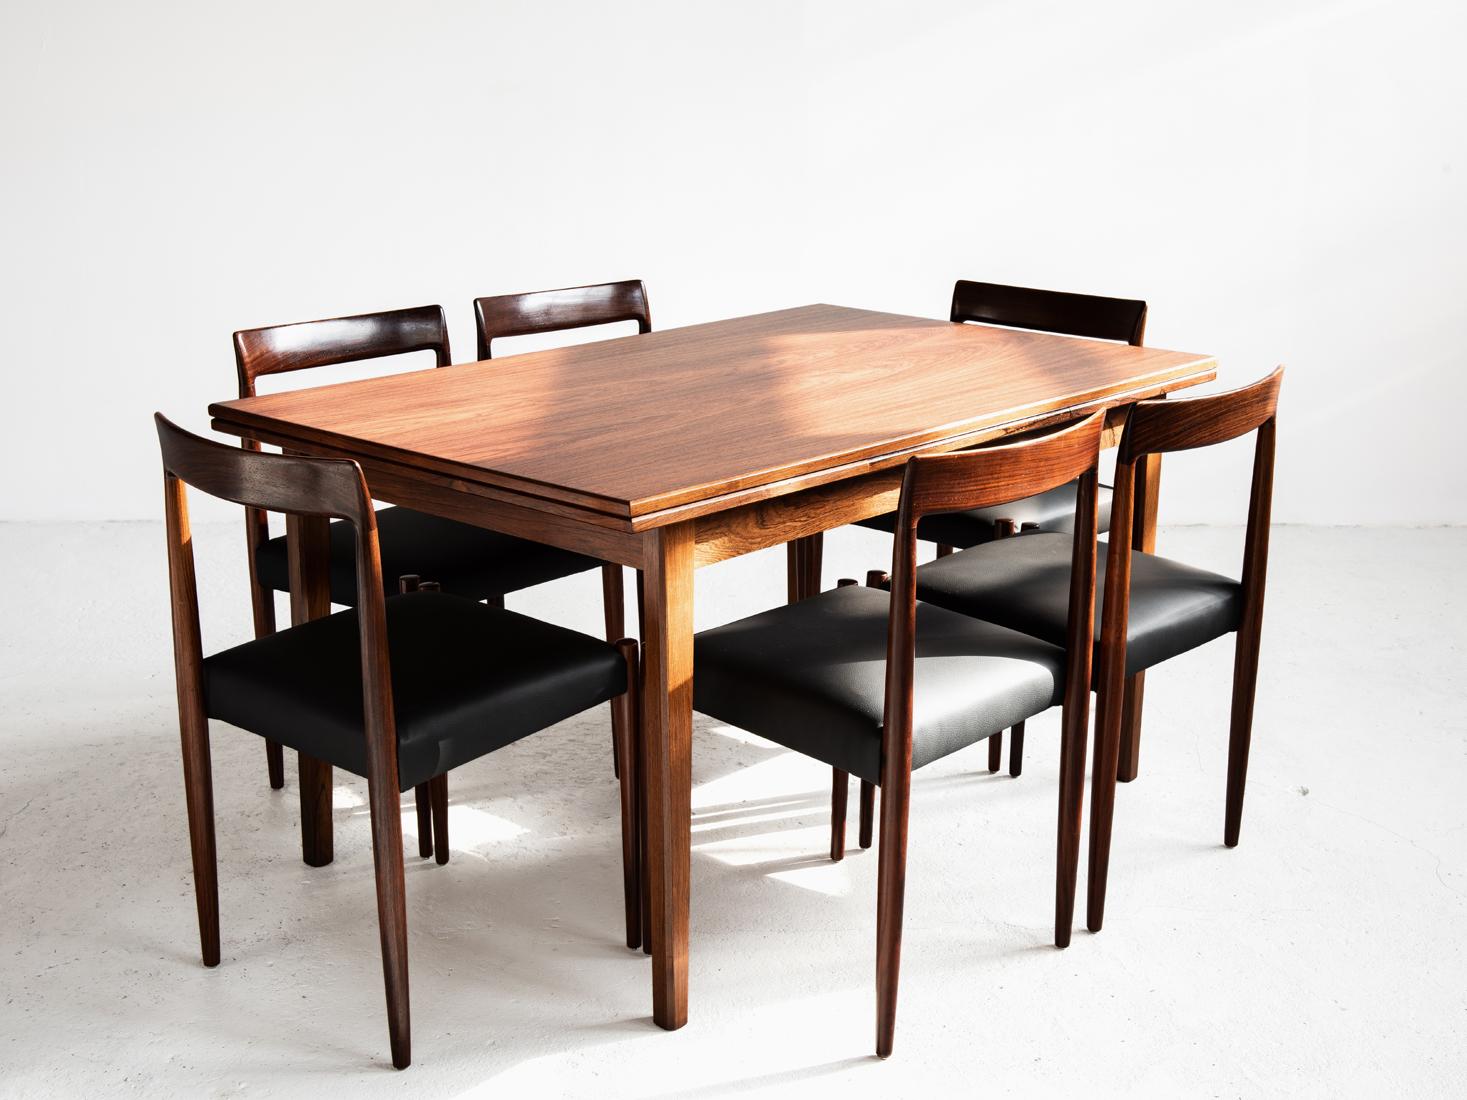 Midcentury Danish Dining Table in Rosewood with 2 Extensions, 1960s For Sale 5